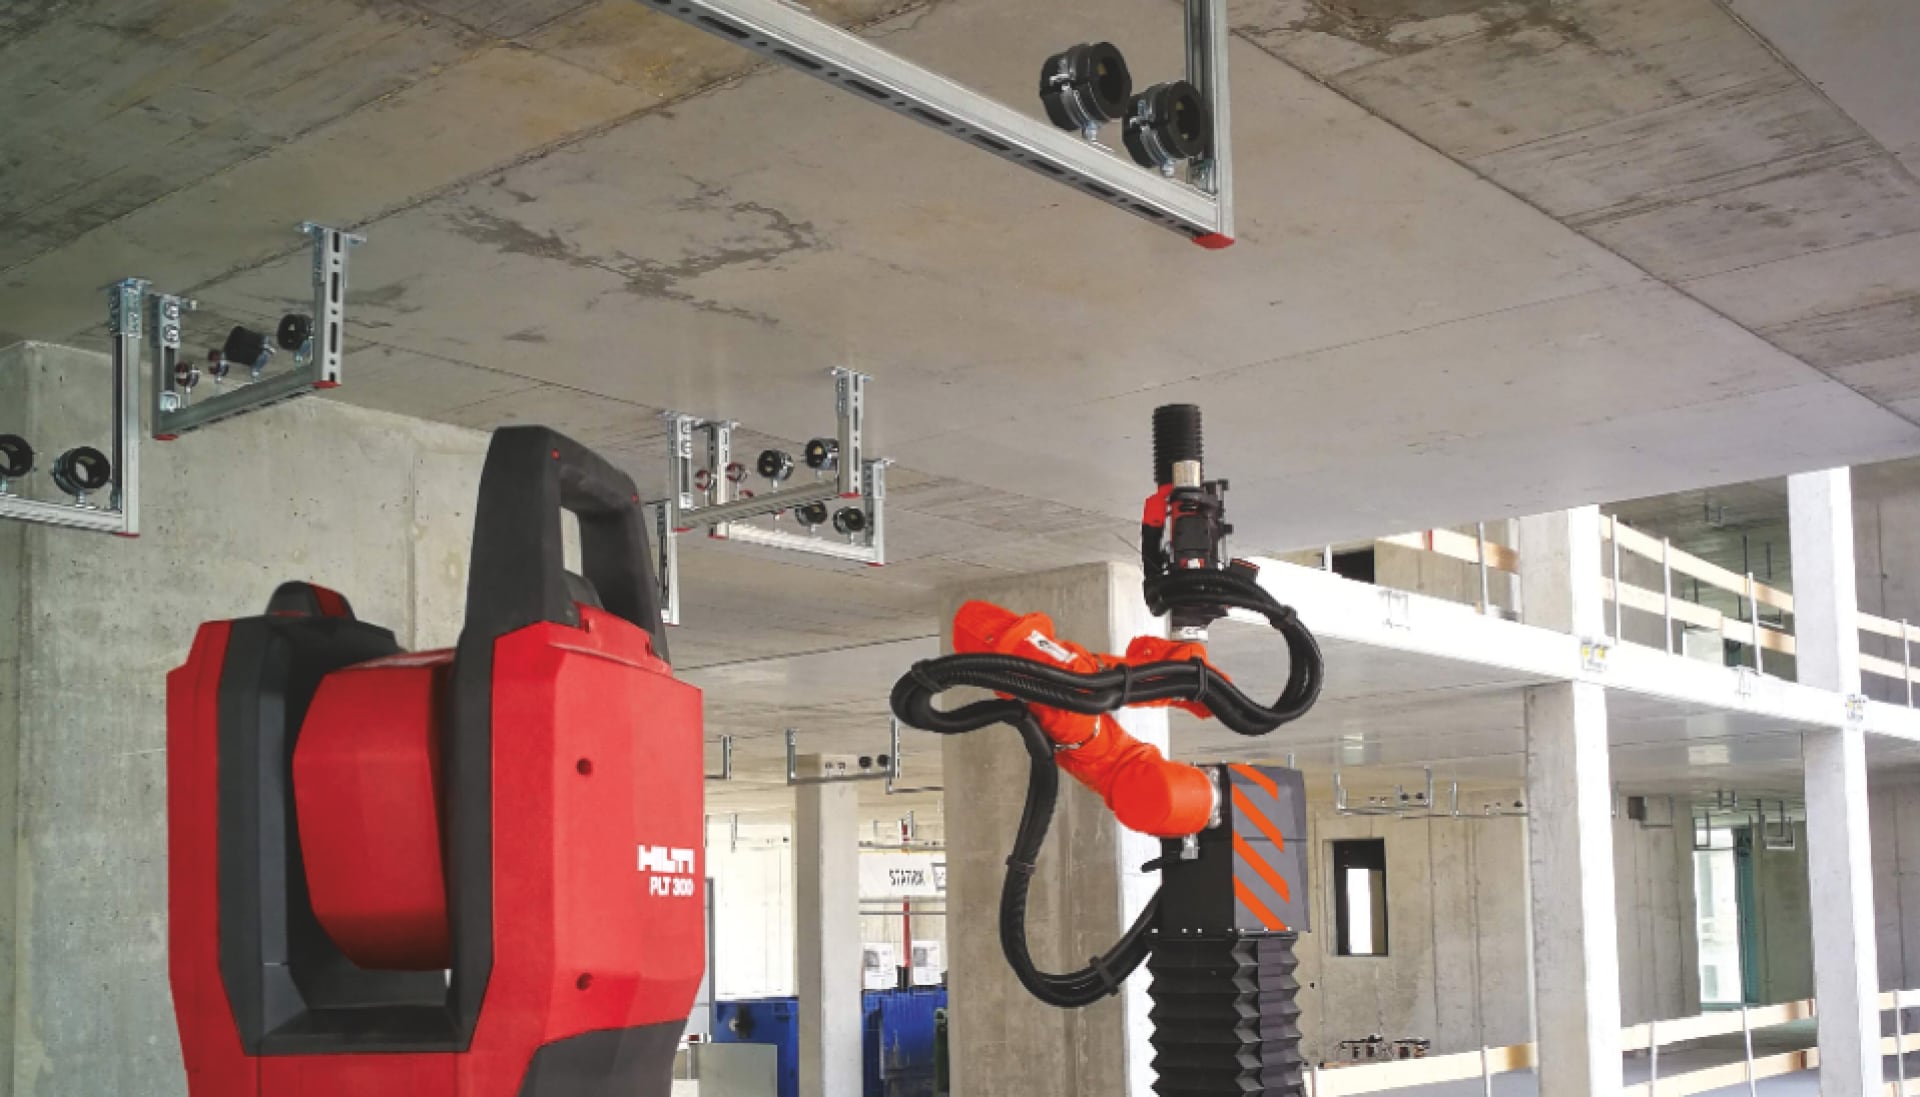 Hilti PLT 300 total station and Jaibot drilling robot on a construction site performing MEP installation.